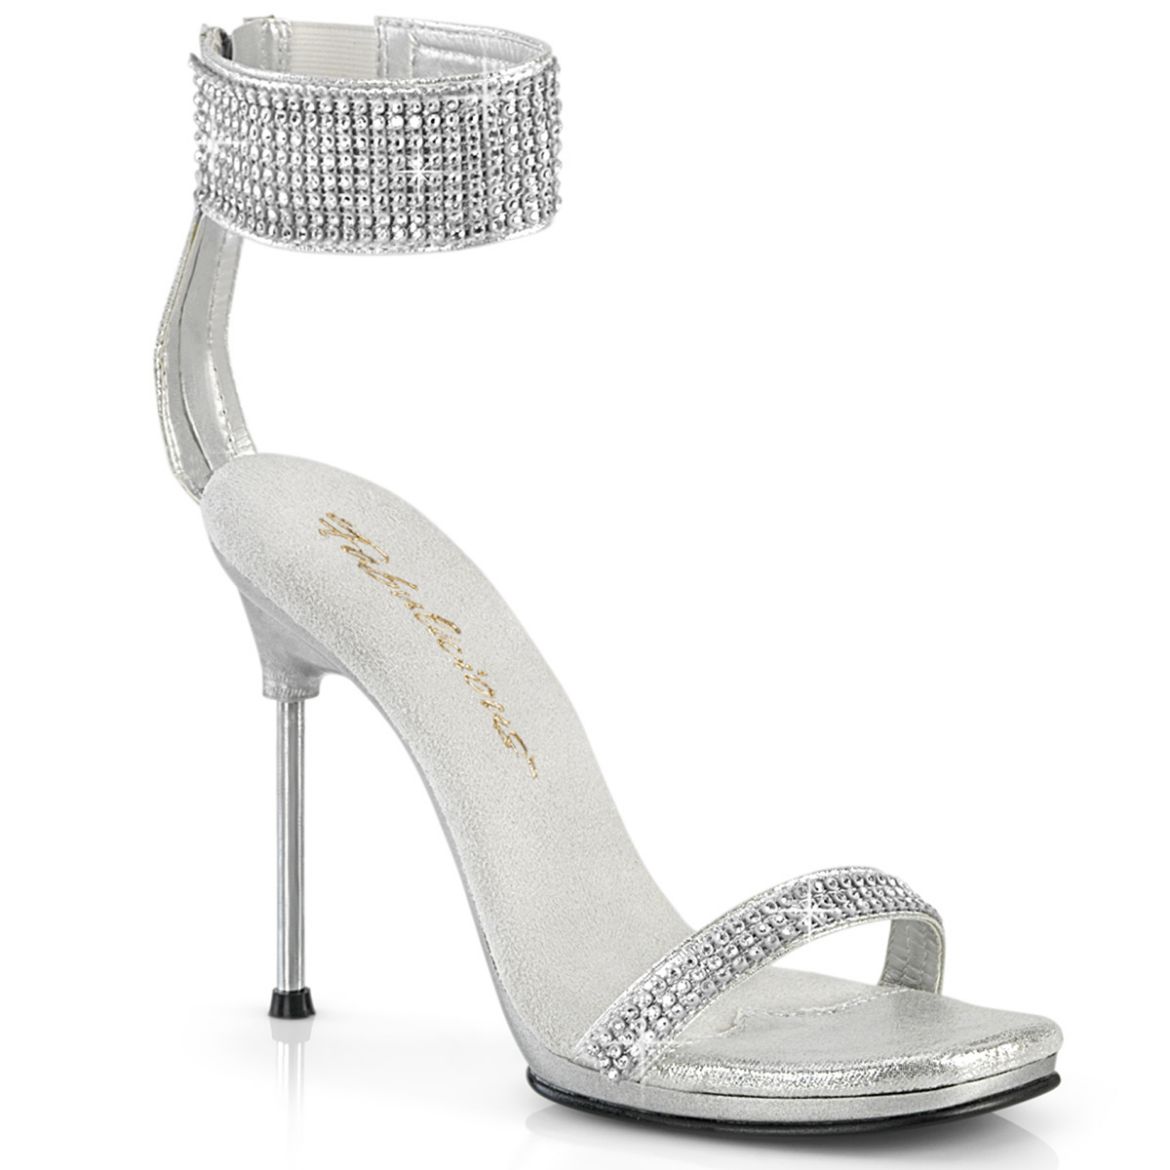 Product image of Fabulicious CHIC-40 Slv Shimmery Fabric-RS/Slv 4 1/2 Inch Heel 1/4 Inch PF Ankle Strap Sandal w/RS Back Zip